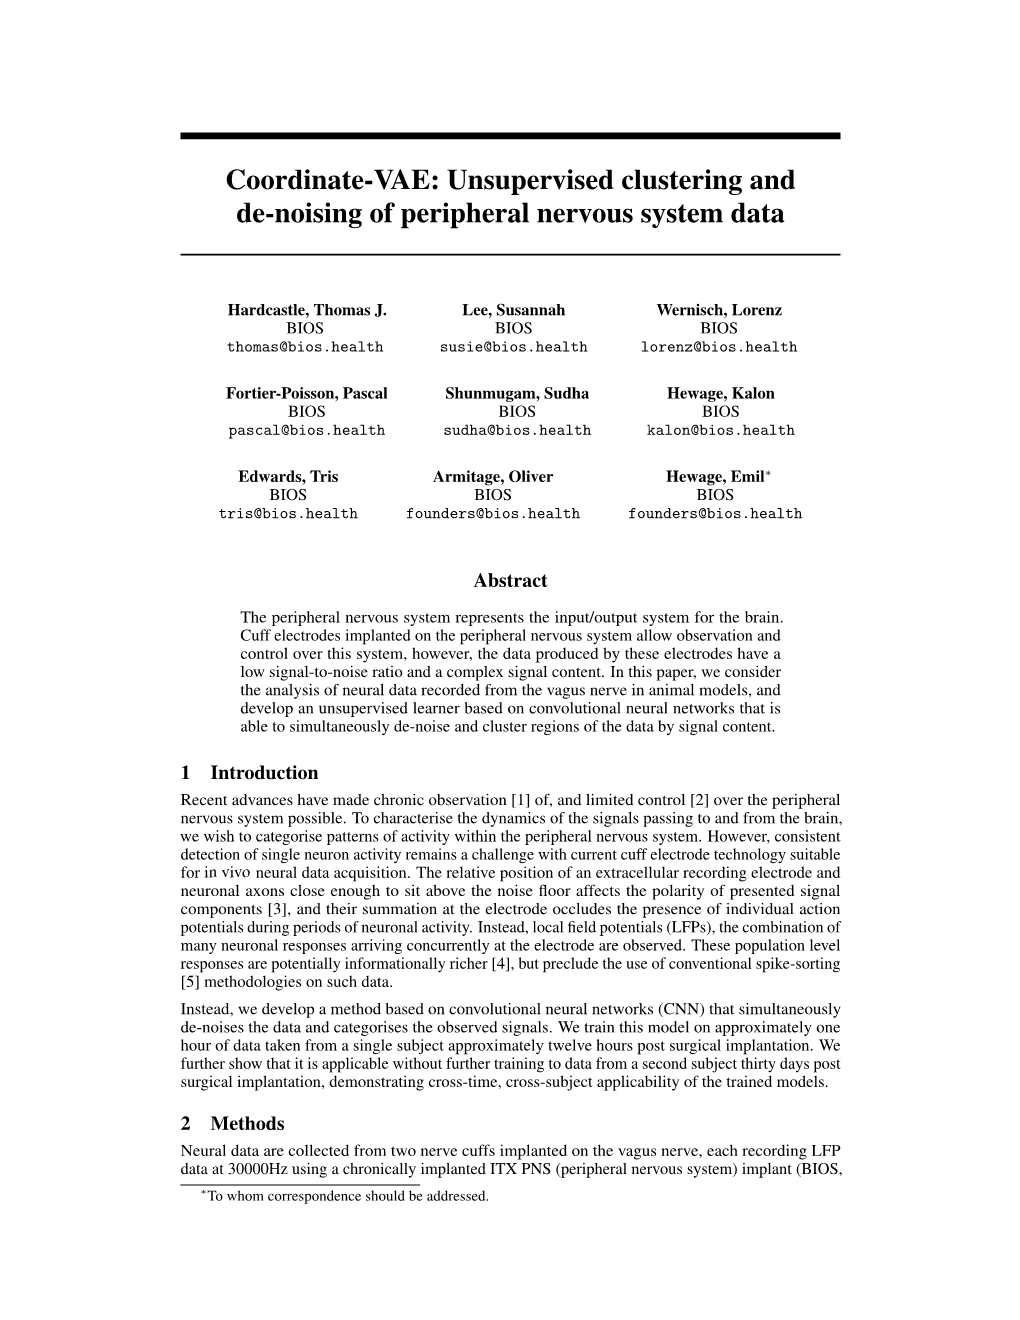 Coordinate-VAE: Unsupervised Clustering and De-Noising of Peripheral Nervous System Data